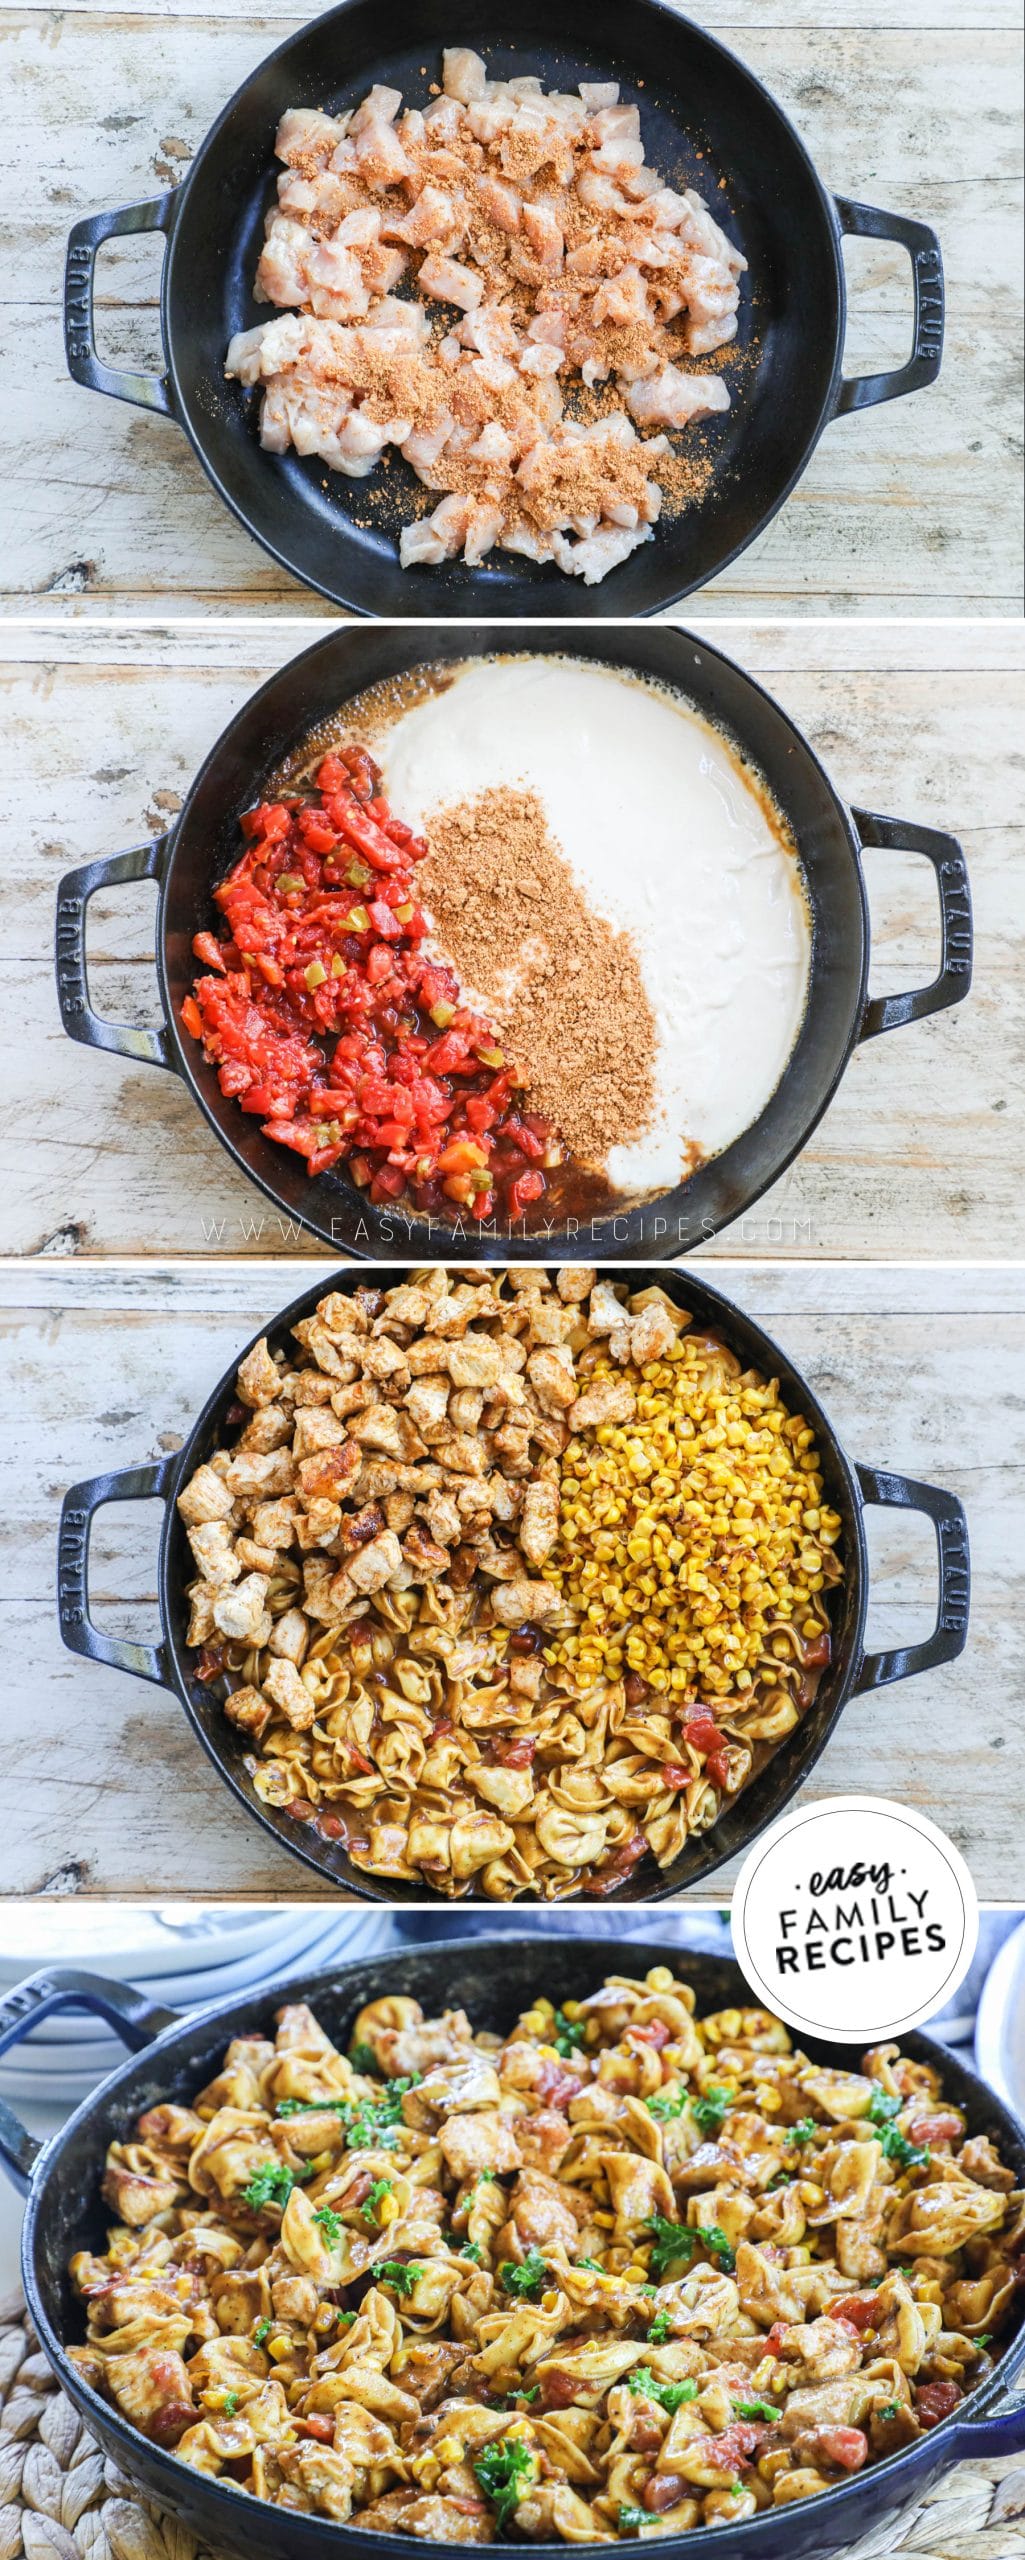 Process photos for How to make taco tortellini 1. brown chicken in skillet. 2. Mix alfredo sauce, taco seasoning, and tomatoes with green chiles, 3. Add tortellini and simmer 4. Stir in chicken, charred corn, and mix together.